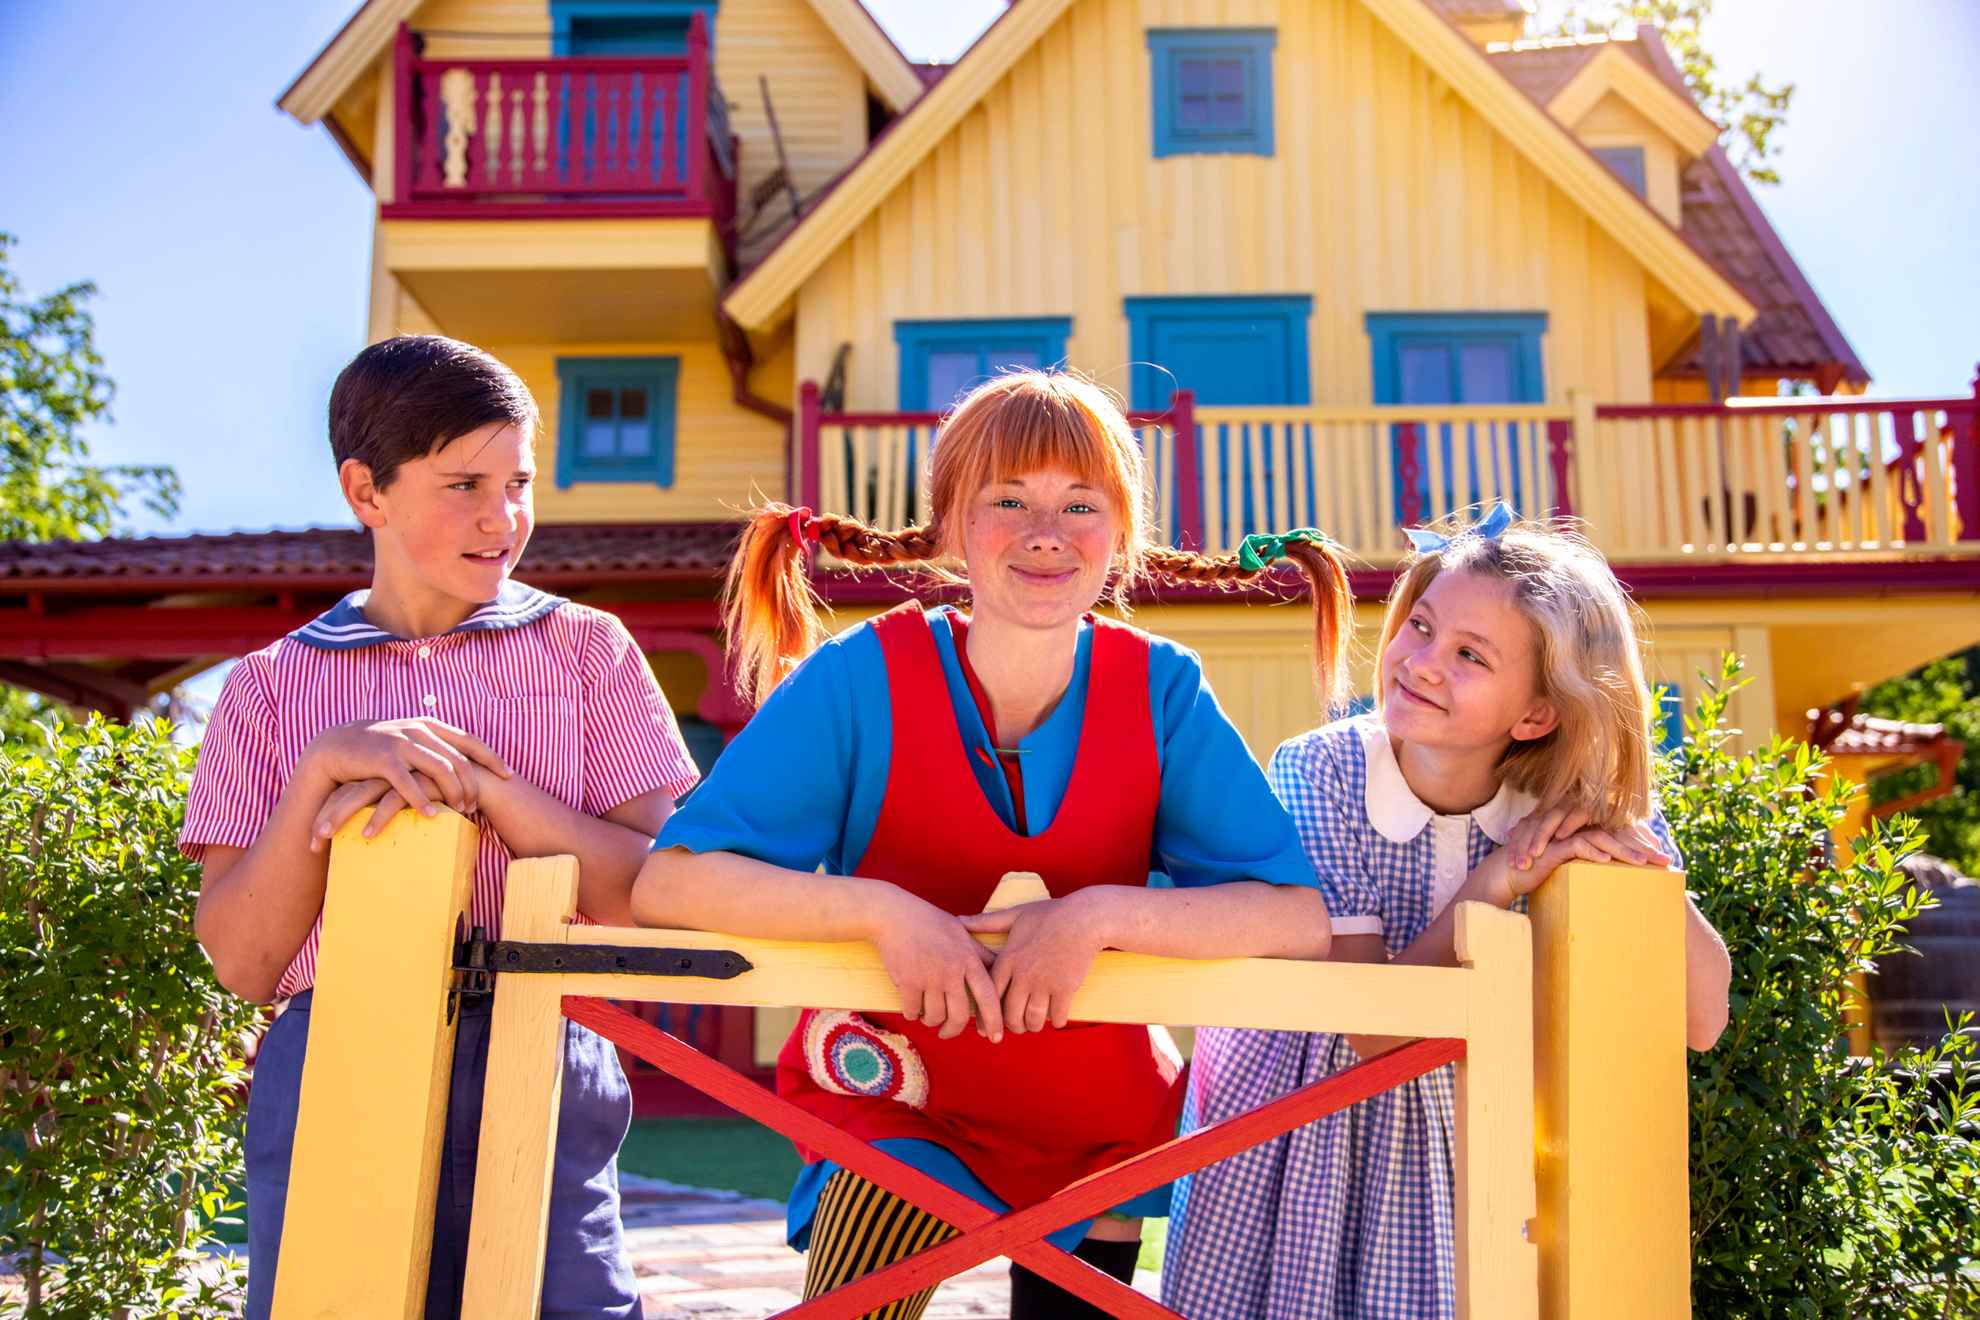 Actors dressed as the characters Tommy, Pippi and Annika stand by a yellow gate in front of a yellow house (Villa Villekulla)..